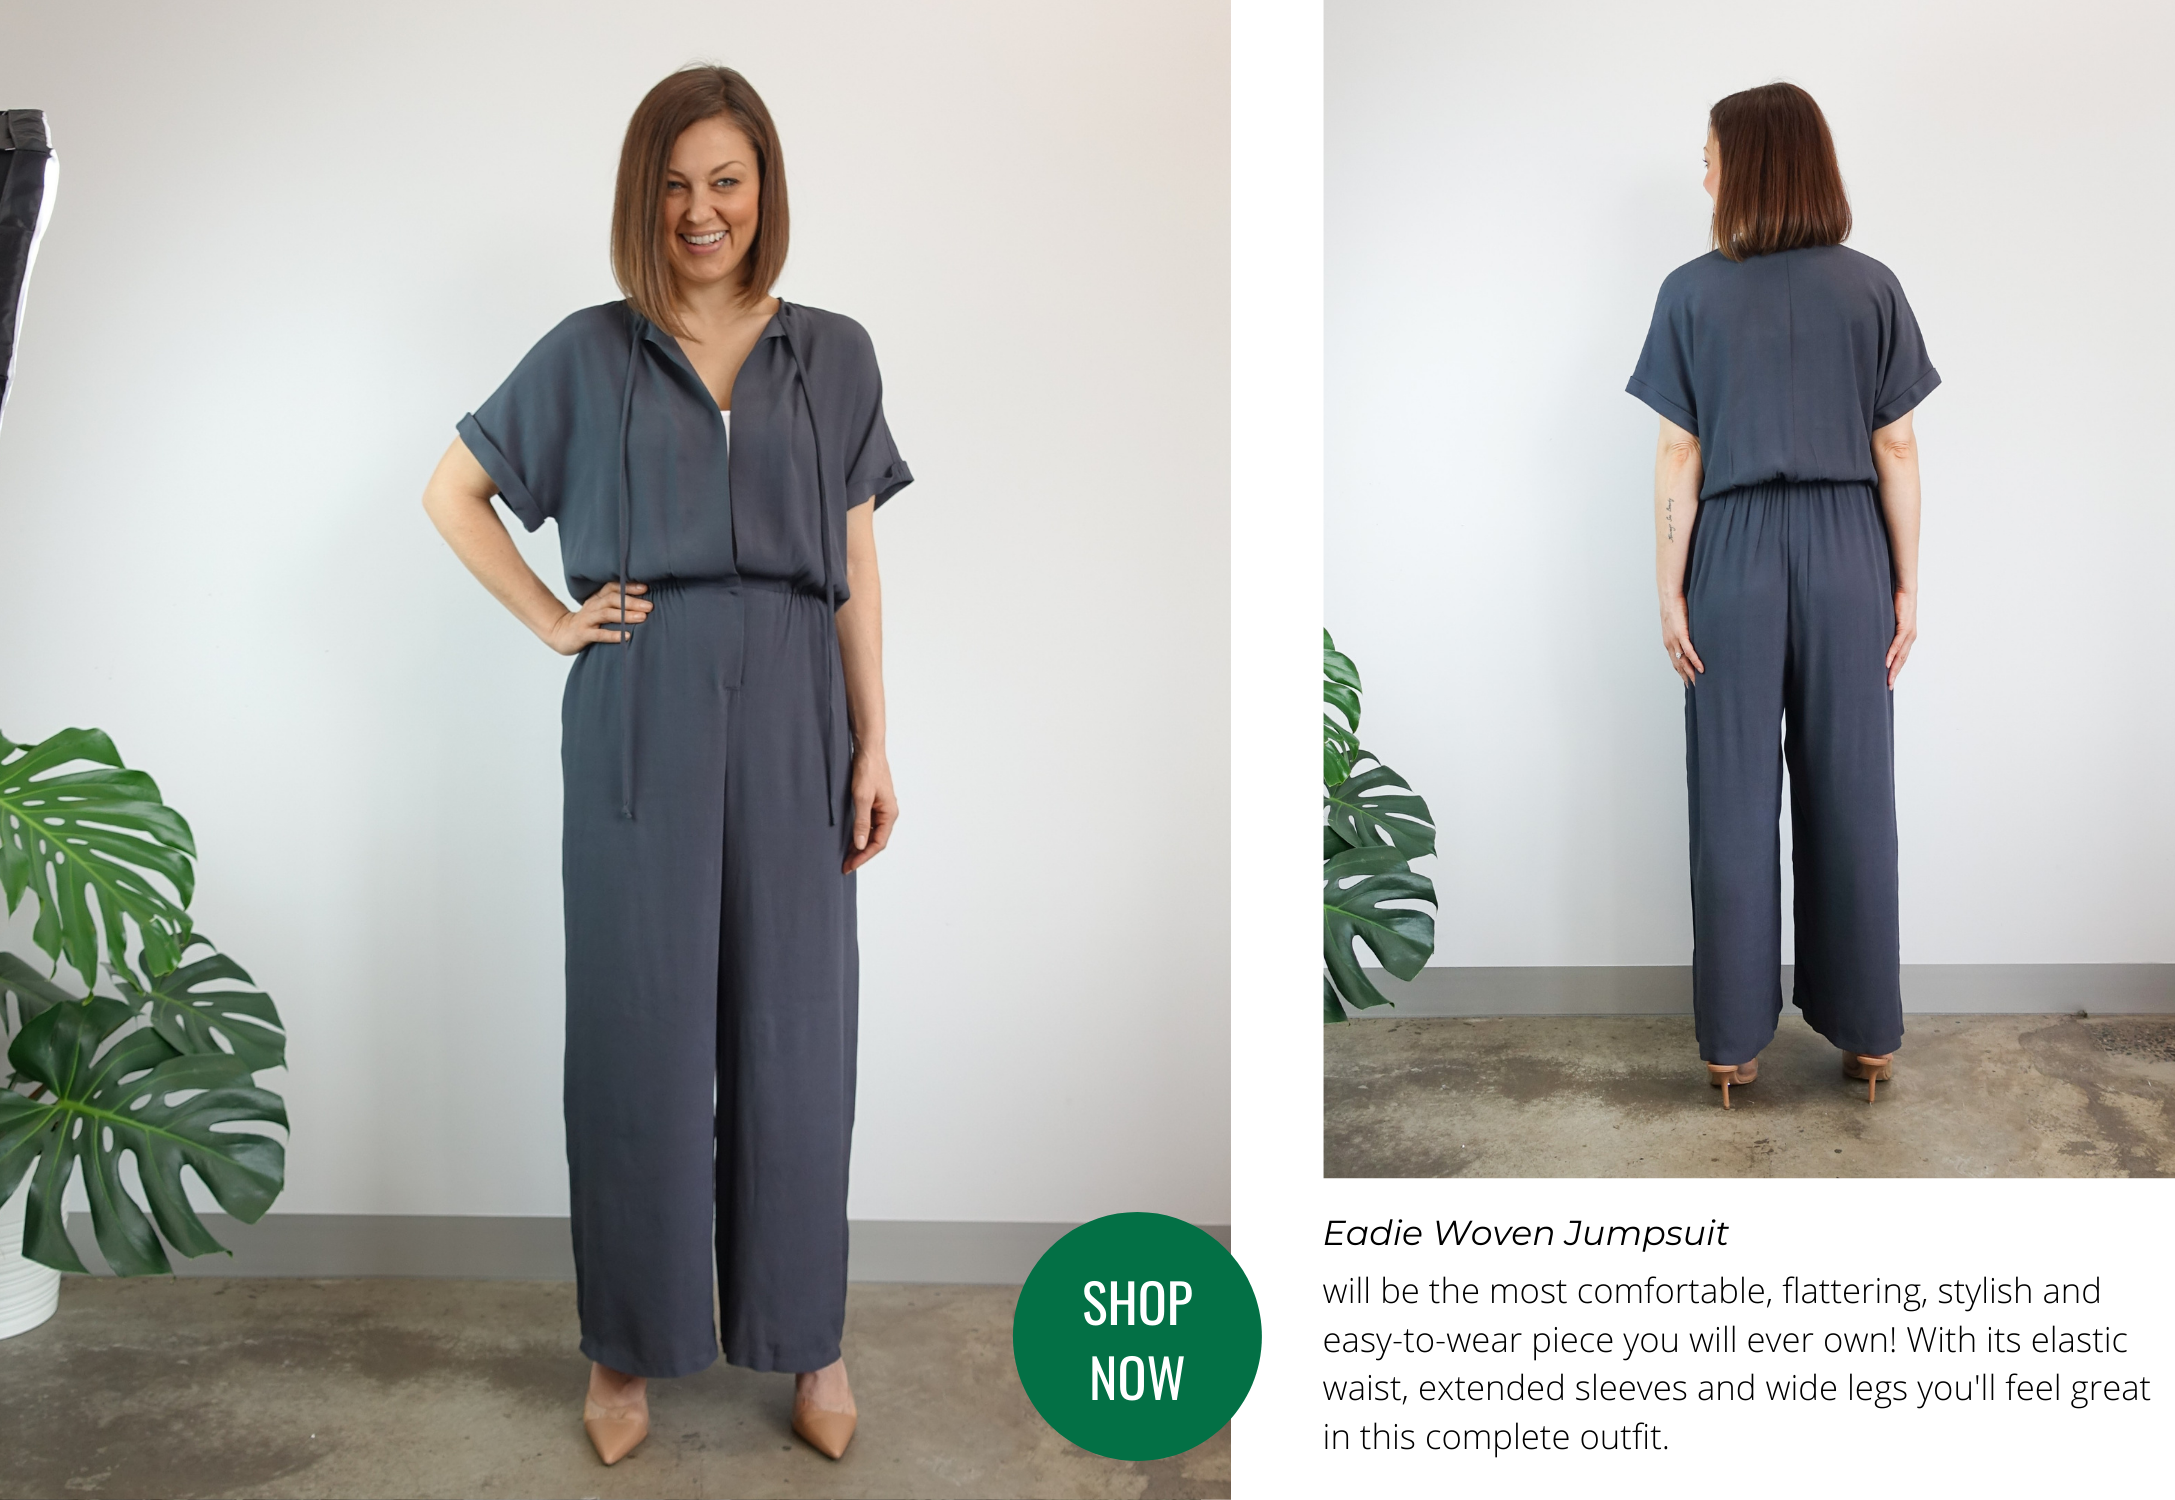 Eadie Woven Jumpsuit Dress | October New Release Sewing Pattern ...